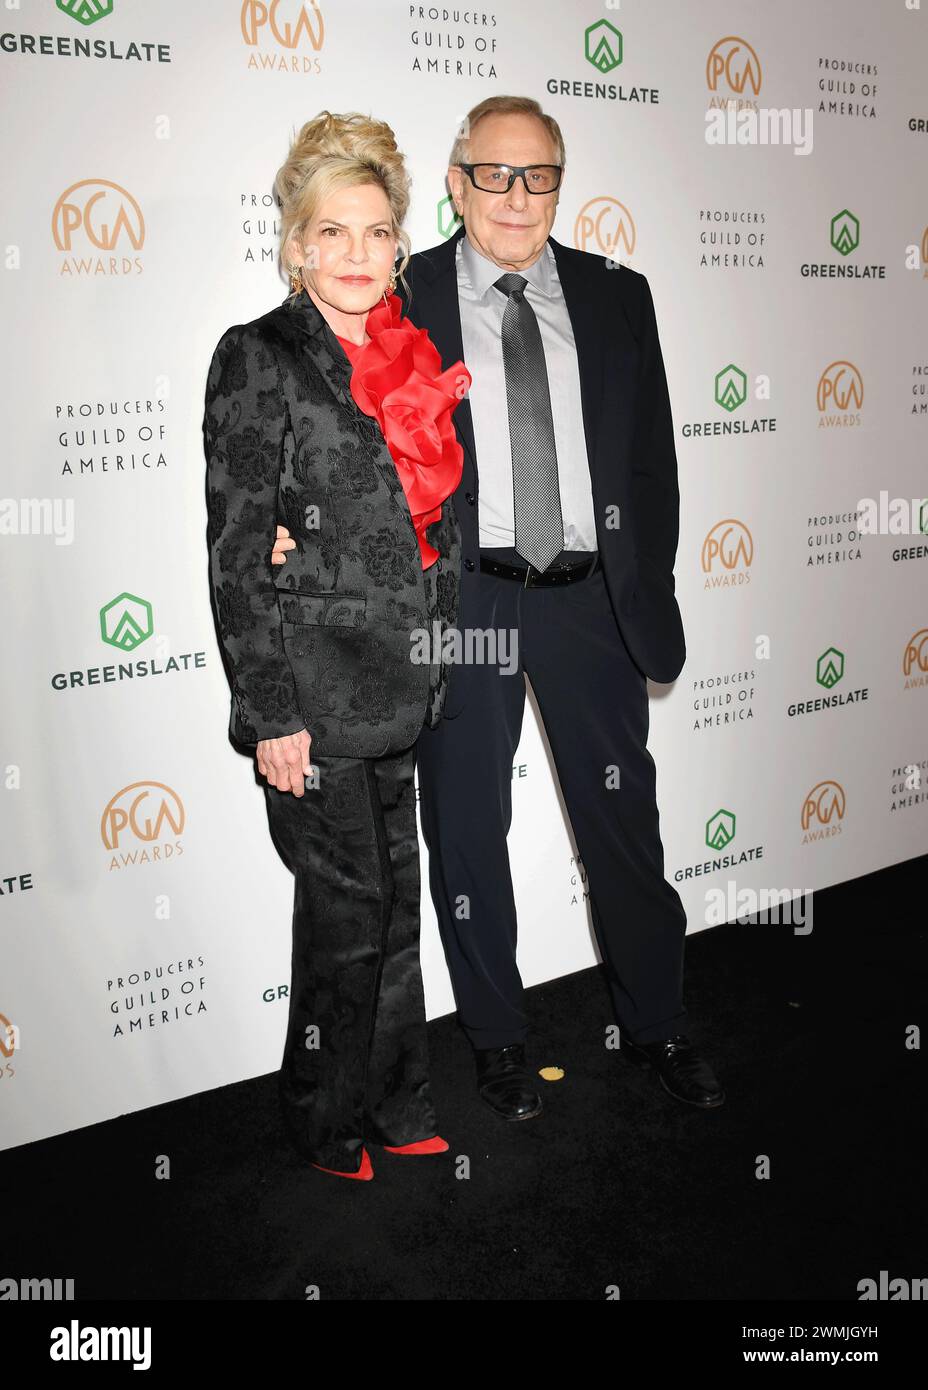 Hollywood, California, USA. 25th Feb, 2024. (L-R) Stephanie Haymes Roven and Charles Roven attend the 35th Annual Producers Guild Awards at The Ray Dolby Ballroom on February 25, 2024 in Hollywood, California. Credit: Jeffrey Mayer/Jtm Photos/Media Punch/Alamy Live News Stock Photo